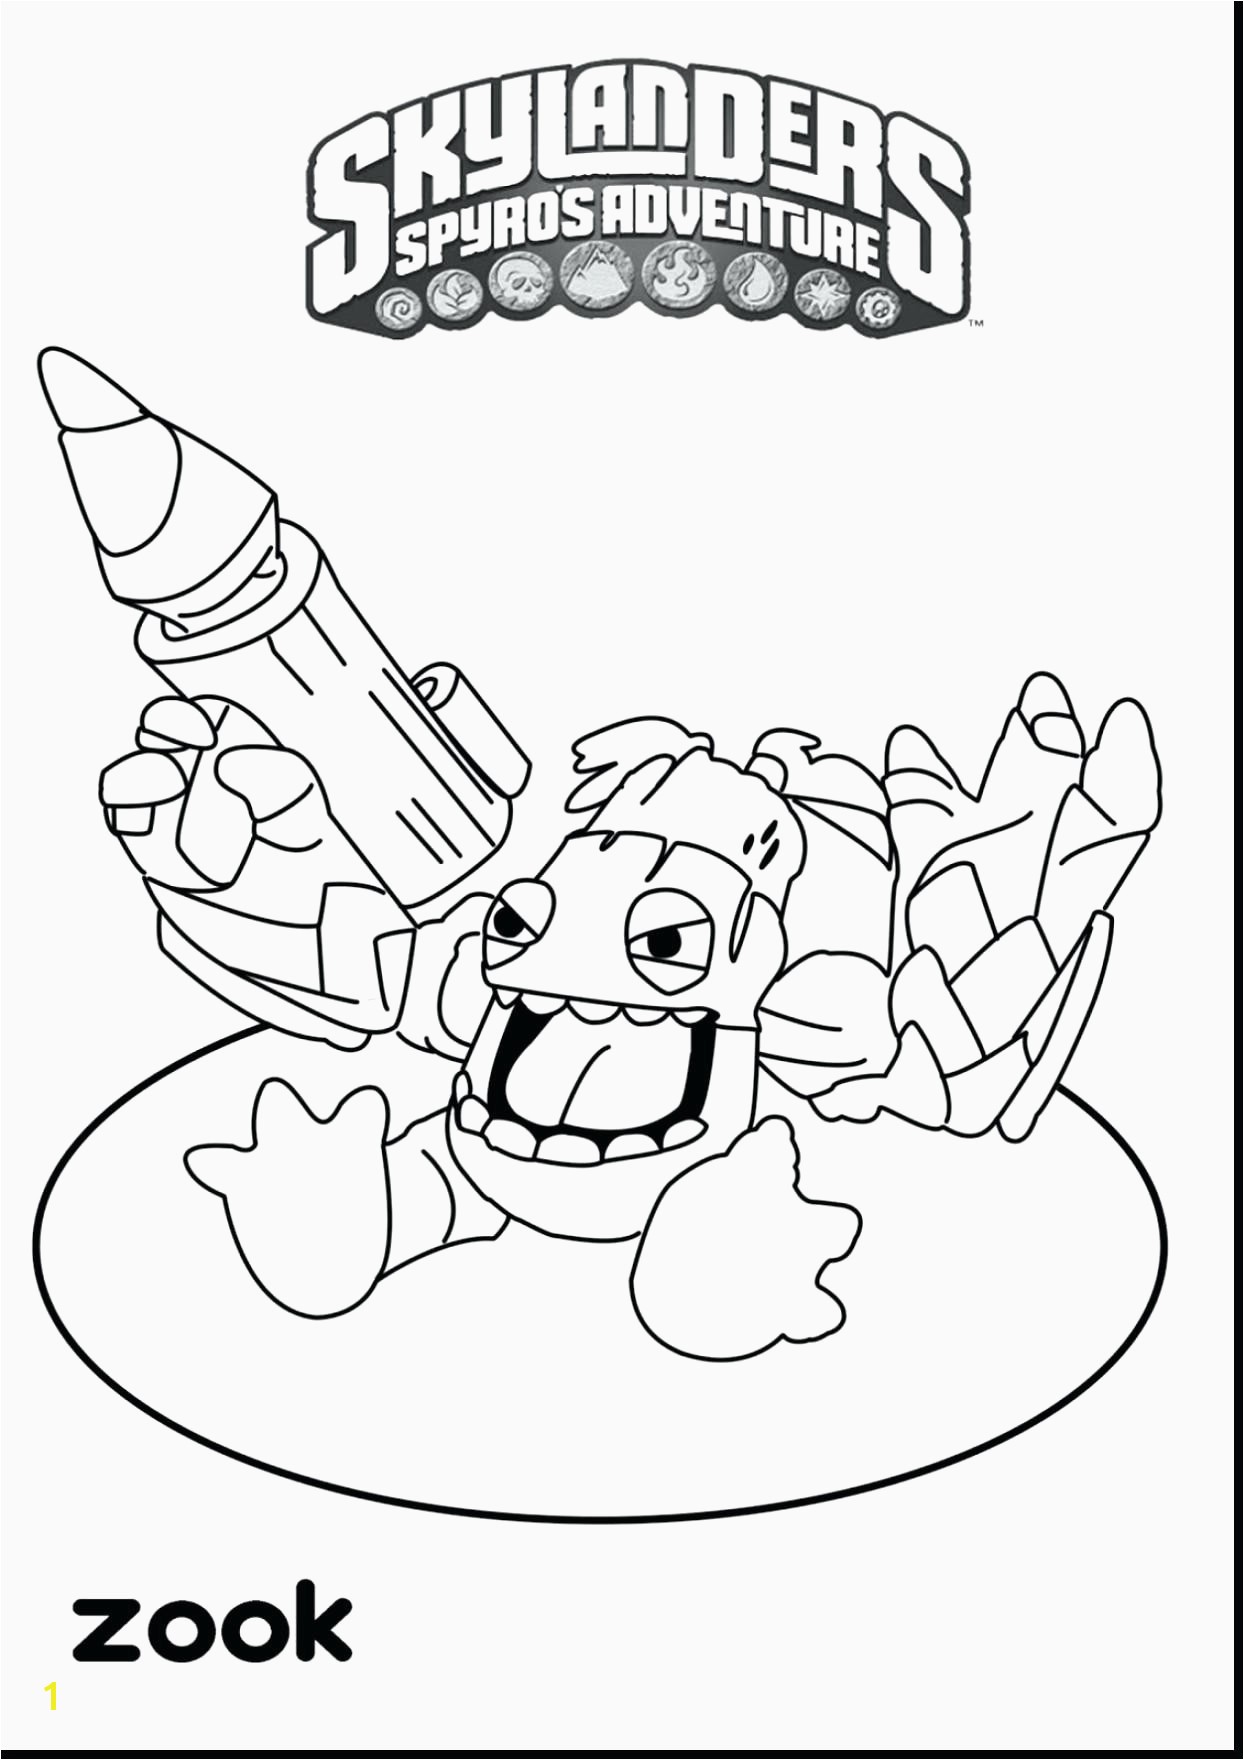 Elf Movie Coloring Pages Katesgrove Page 70 Of 85 Printable Coloring Pages